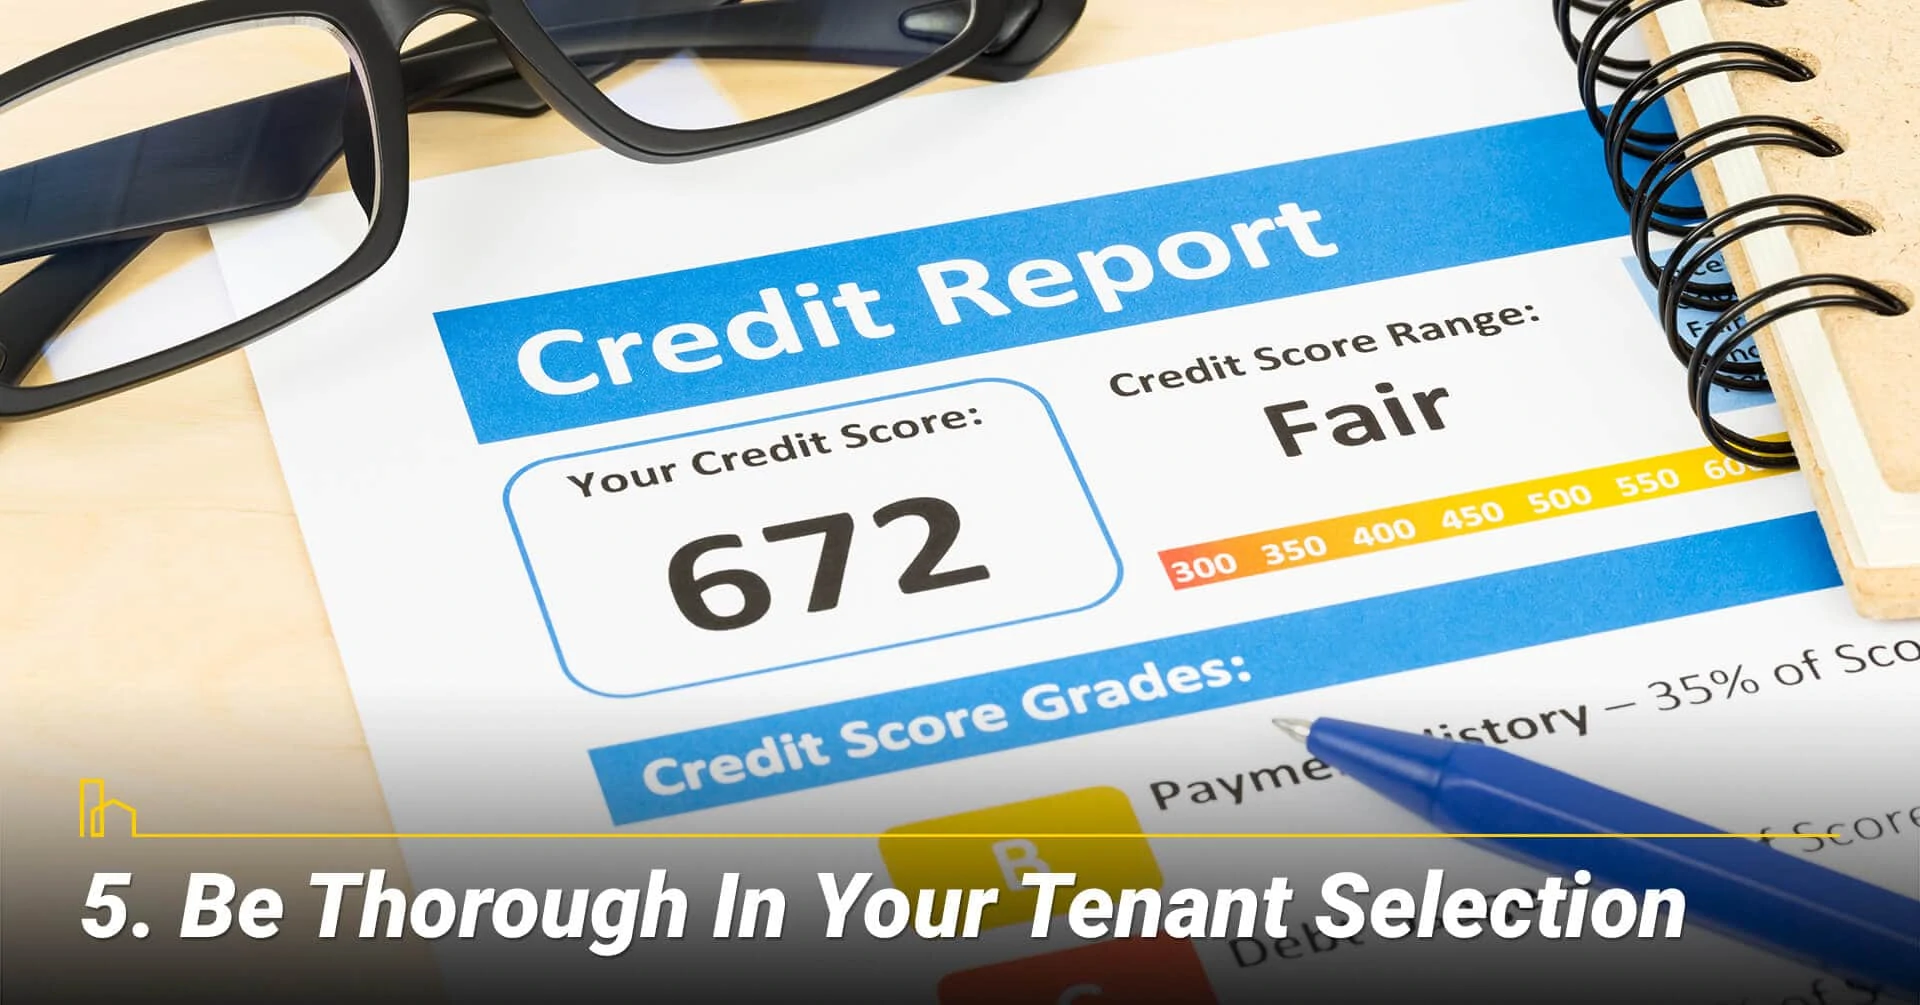 Be Thorough In Your Tenant Selection, select your tenant carefully